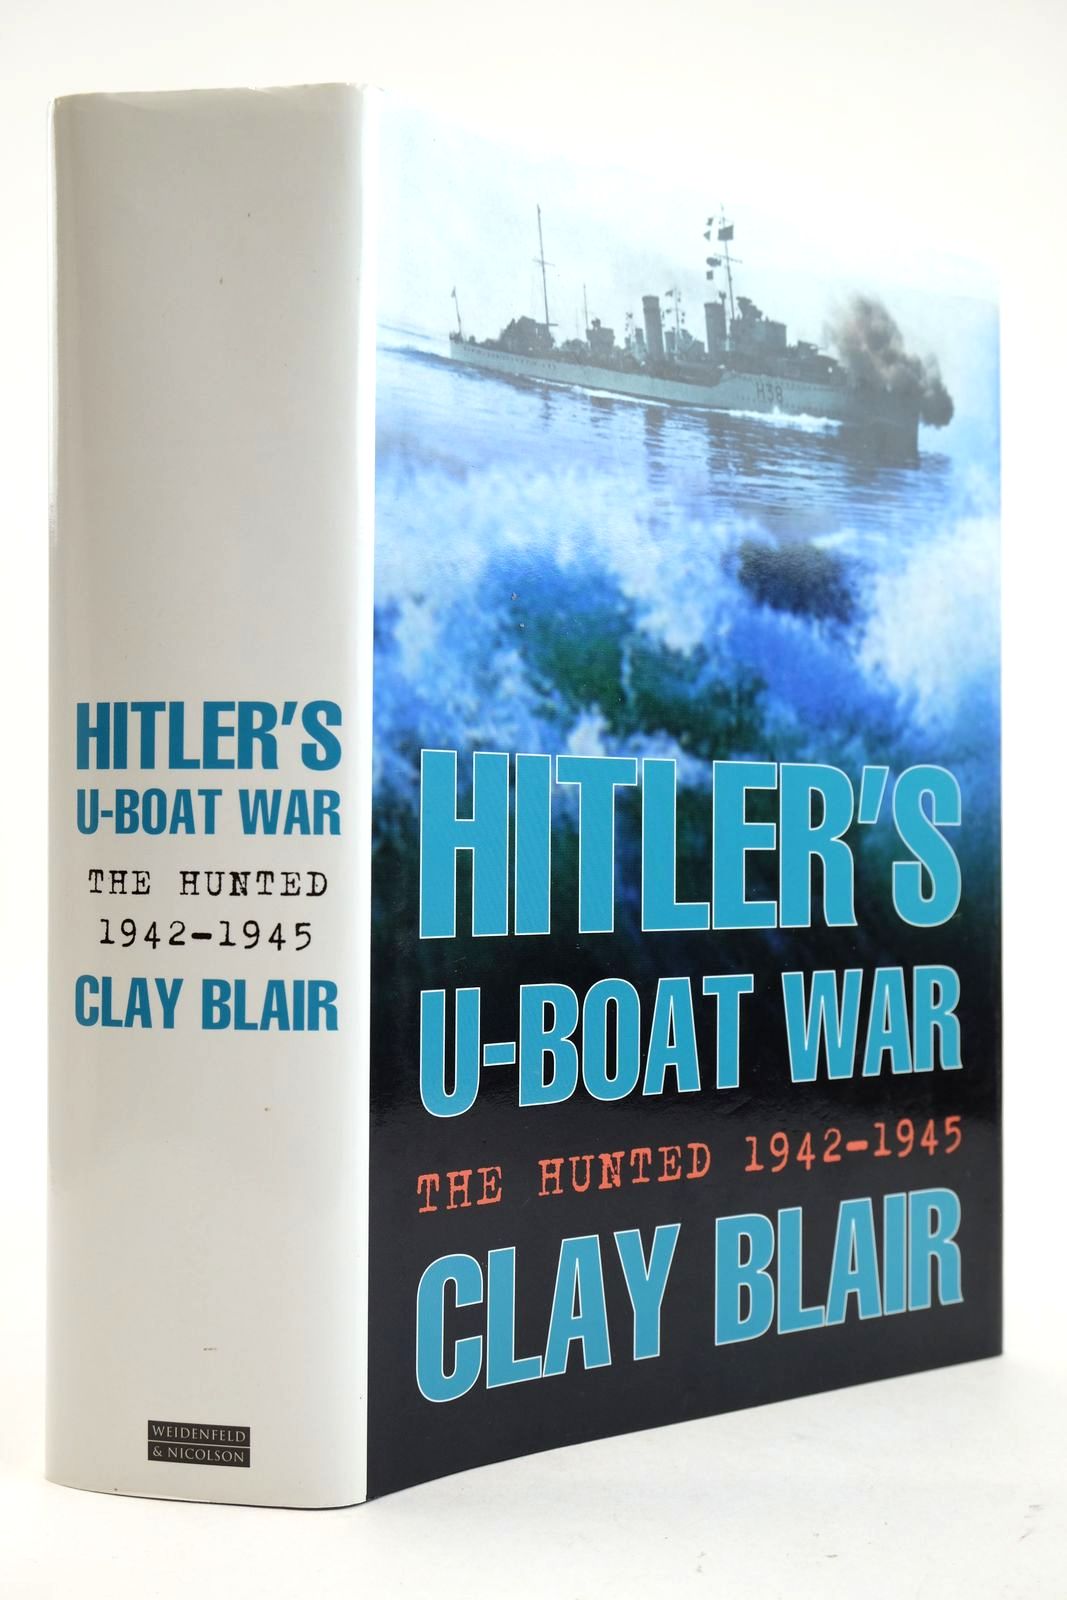 Photo of HITLER'S U-BOAT WAR: THE HUNTED 1942-1945 written by Blair, Clay published by Weidenfeld and Nicolson (STOCK CODE: 2132900)  for sale by Stella & Rose's Books